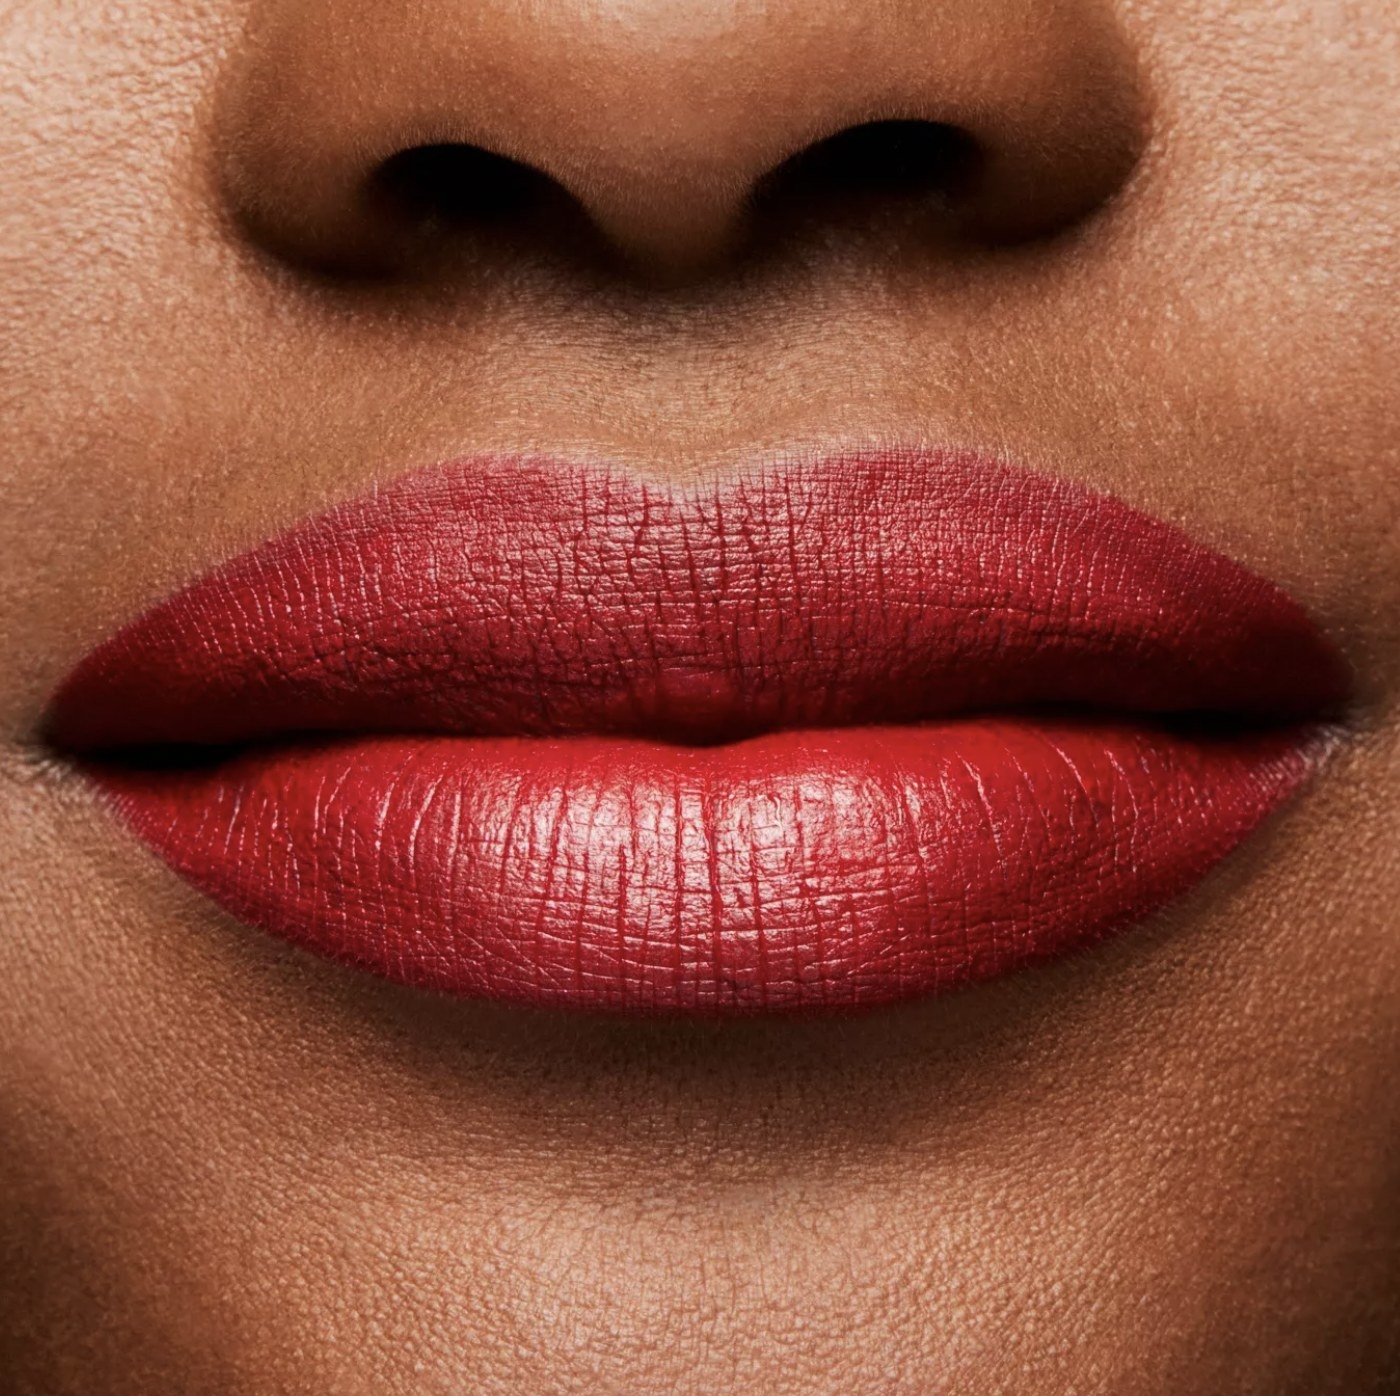 Darker skinned model in close-up showing the matte red lipstick